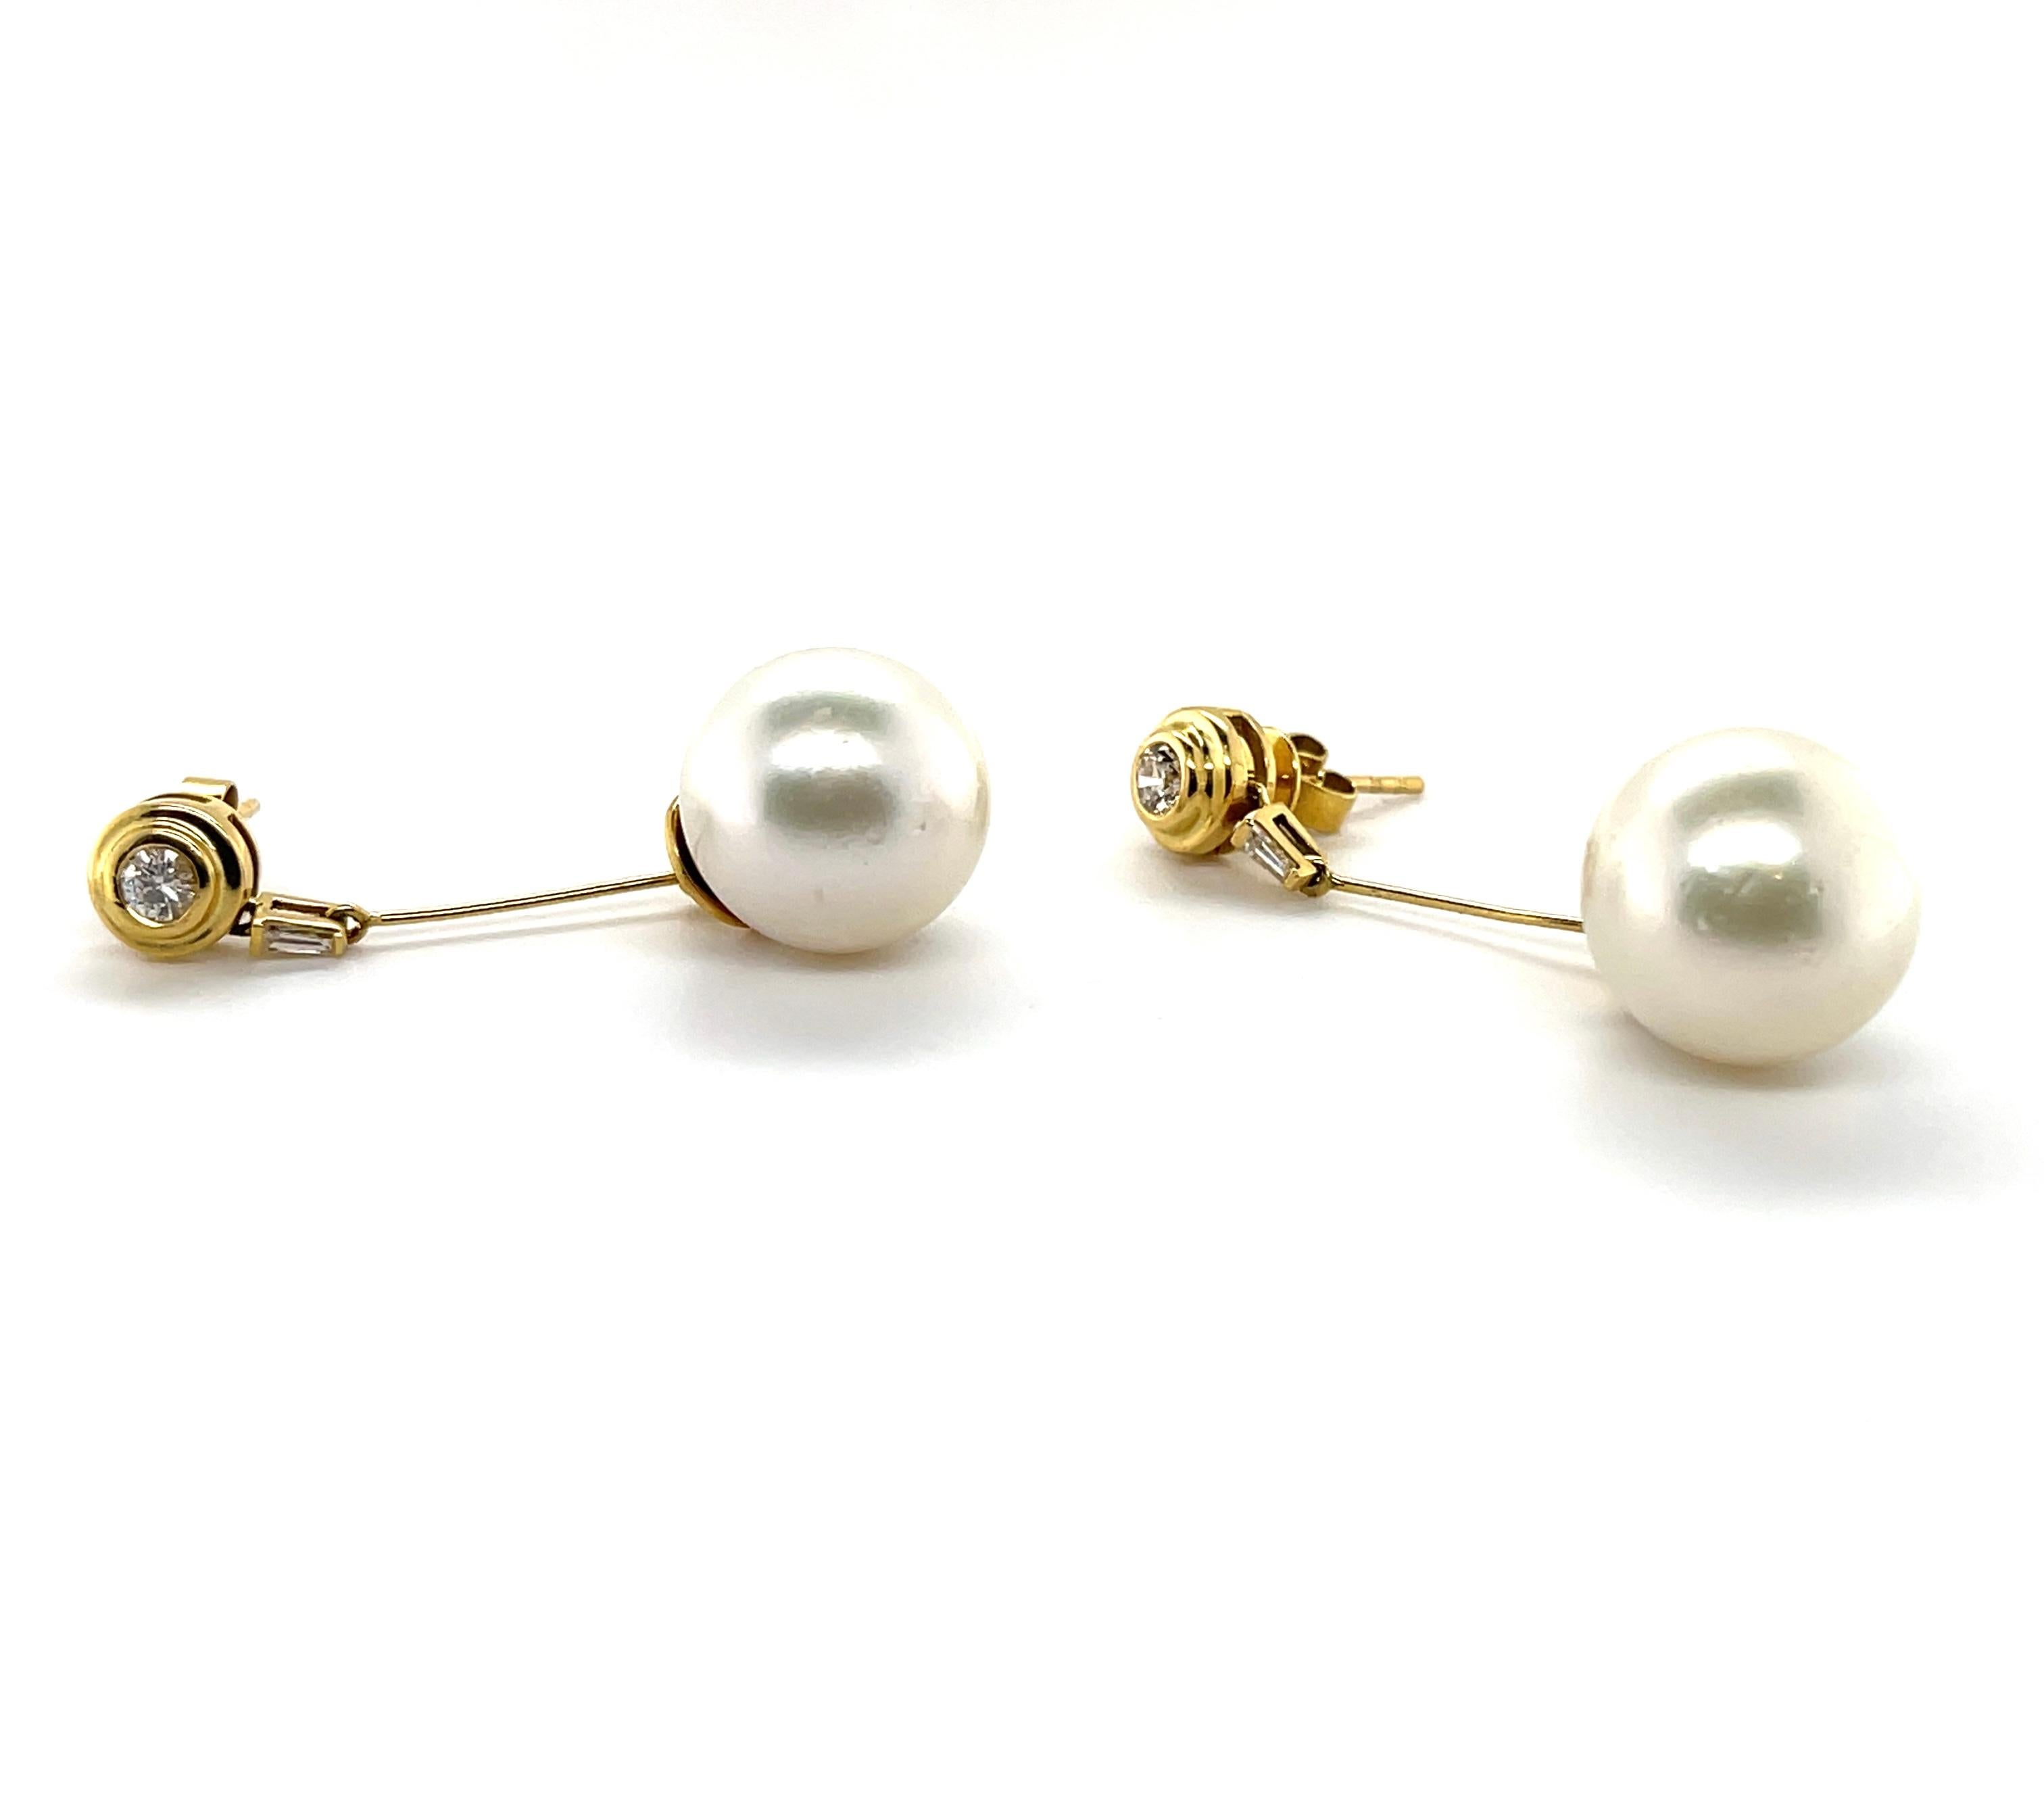 South Sea Pearl, crafted with eighteen karat yellow gold, featuring two round brilliant cut diamonds and two tapered baguette cut diamonds, complemented by a classy polished finish design. 

Total Diamond Weight: 0.42ct
Diamond Clarity/Colour: 